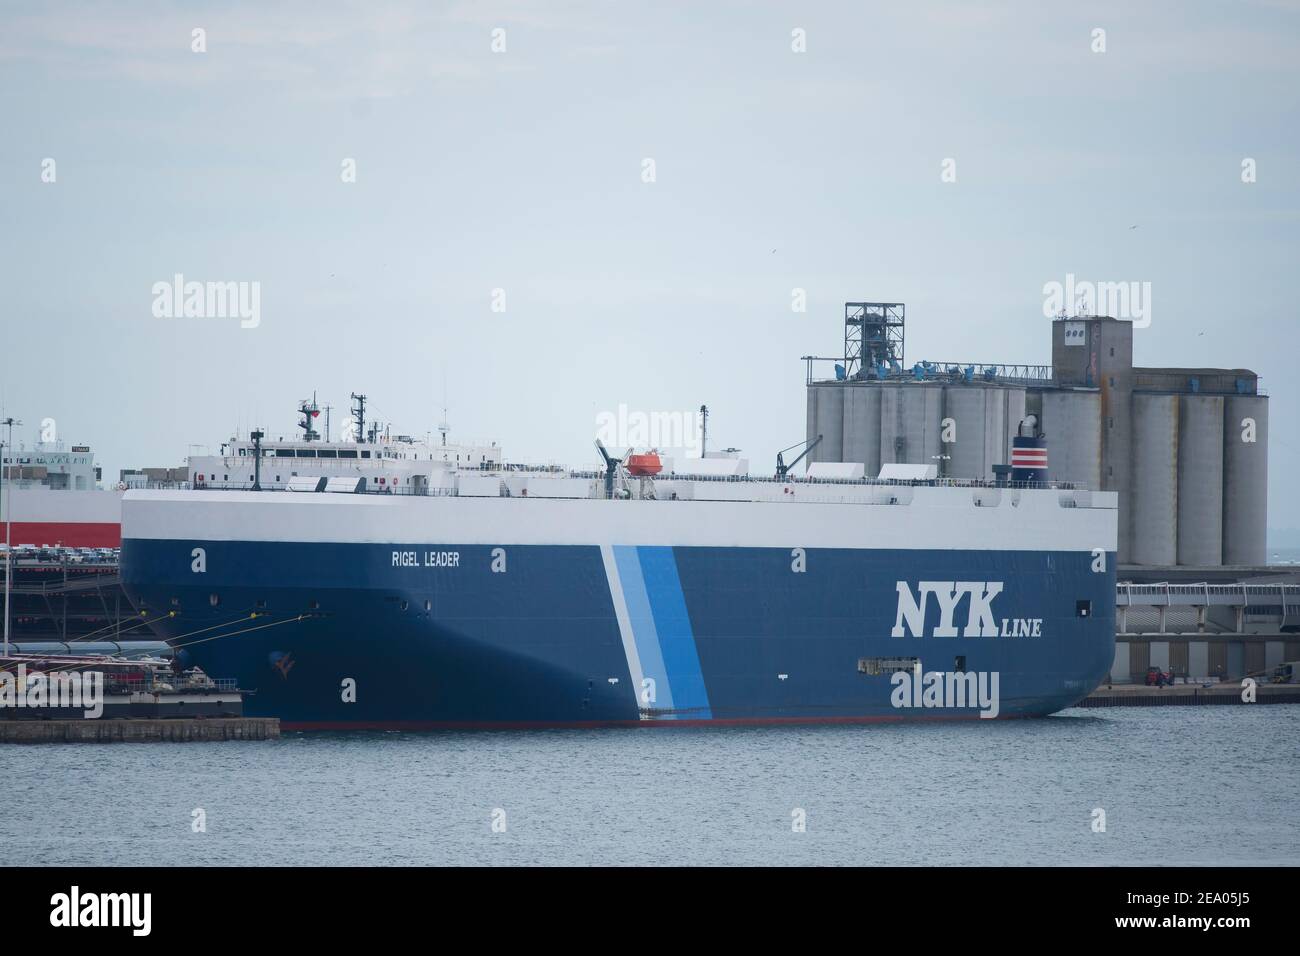 The Rigel Leader NYK Line ship docked in the Port of Southampton in Southampton, England, United Kingdom. Stock Photo